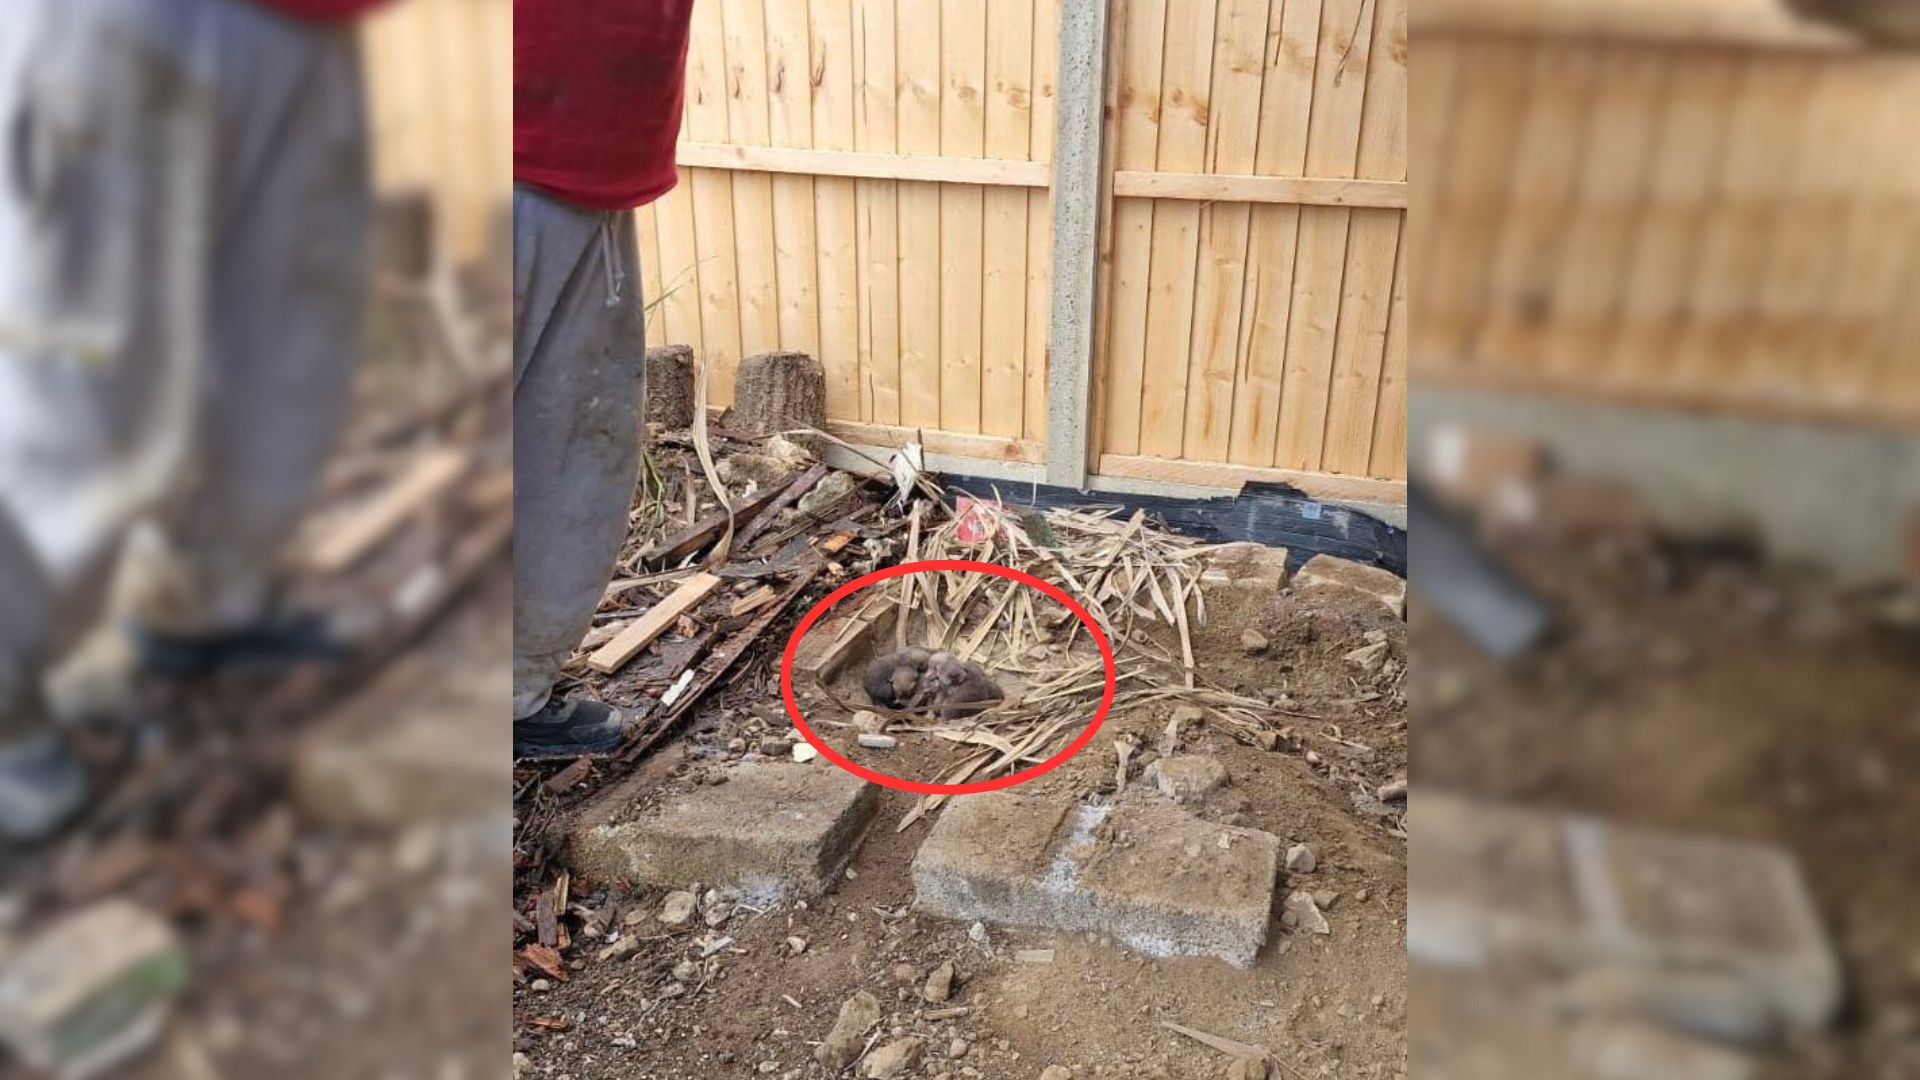 Homeowners Shocked To Discover A Tiny Family Sleeping Underneath Their Demolished Shed